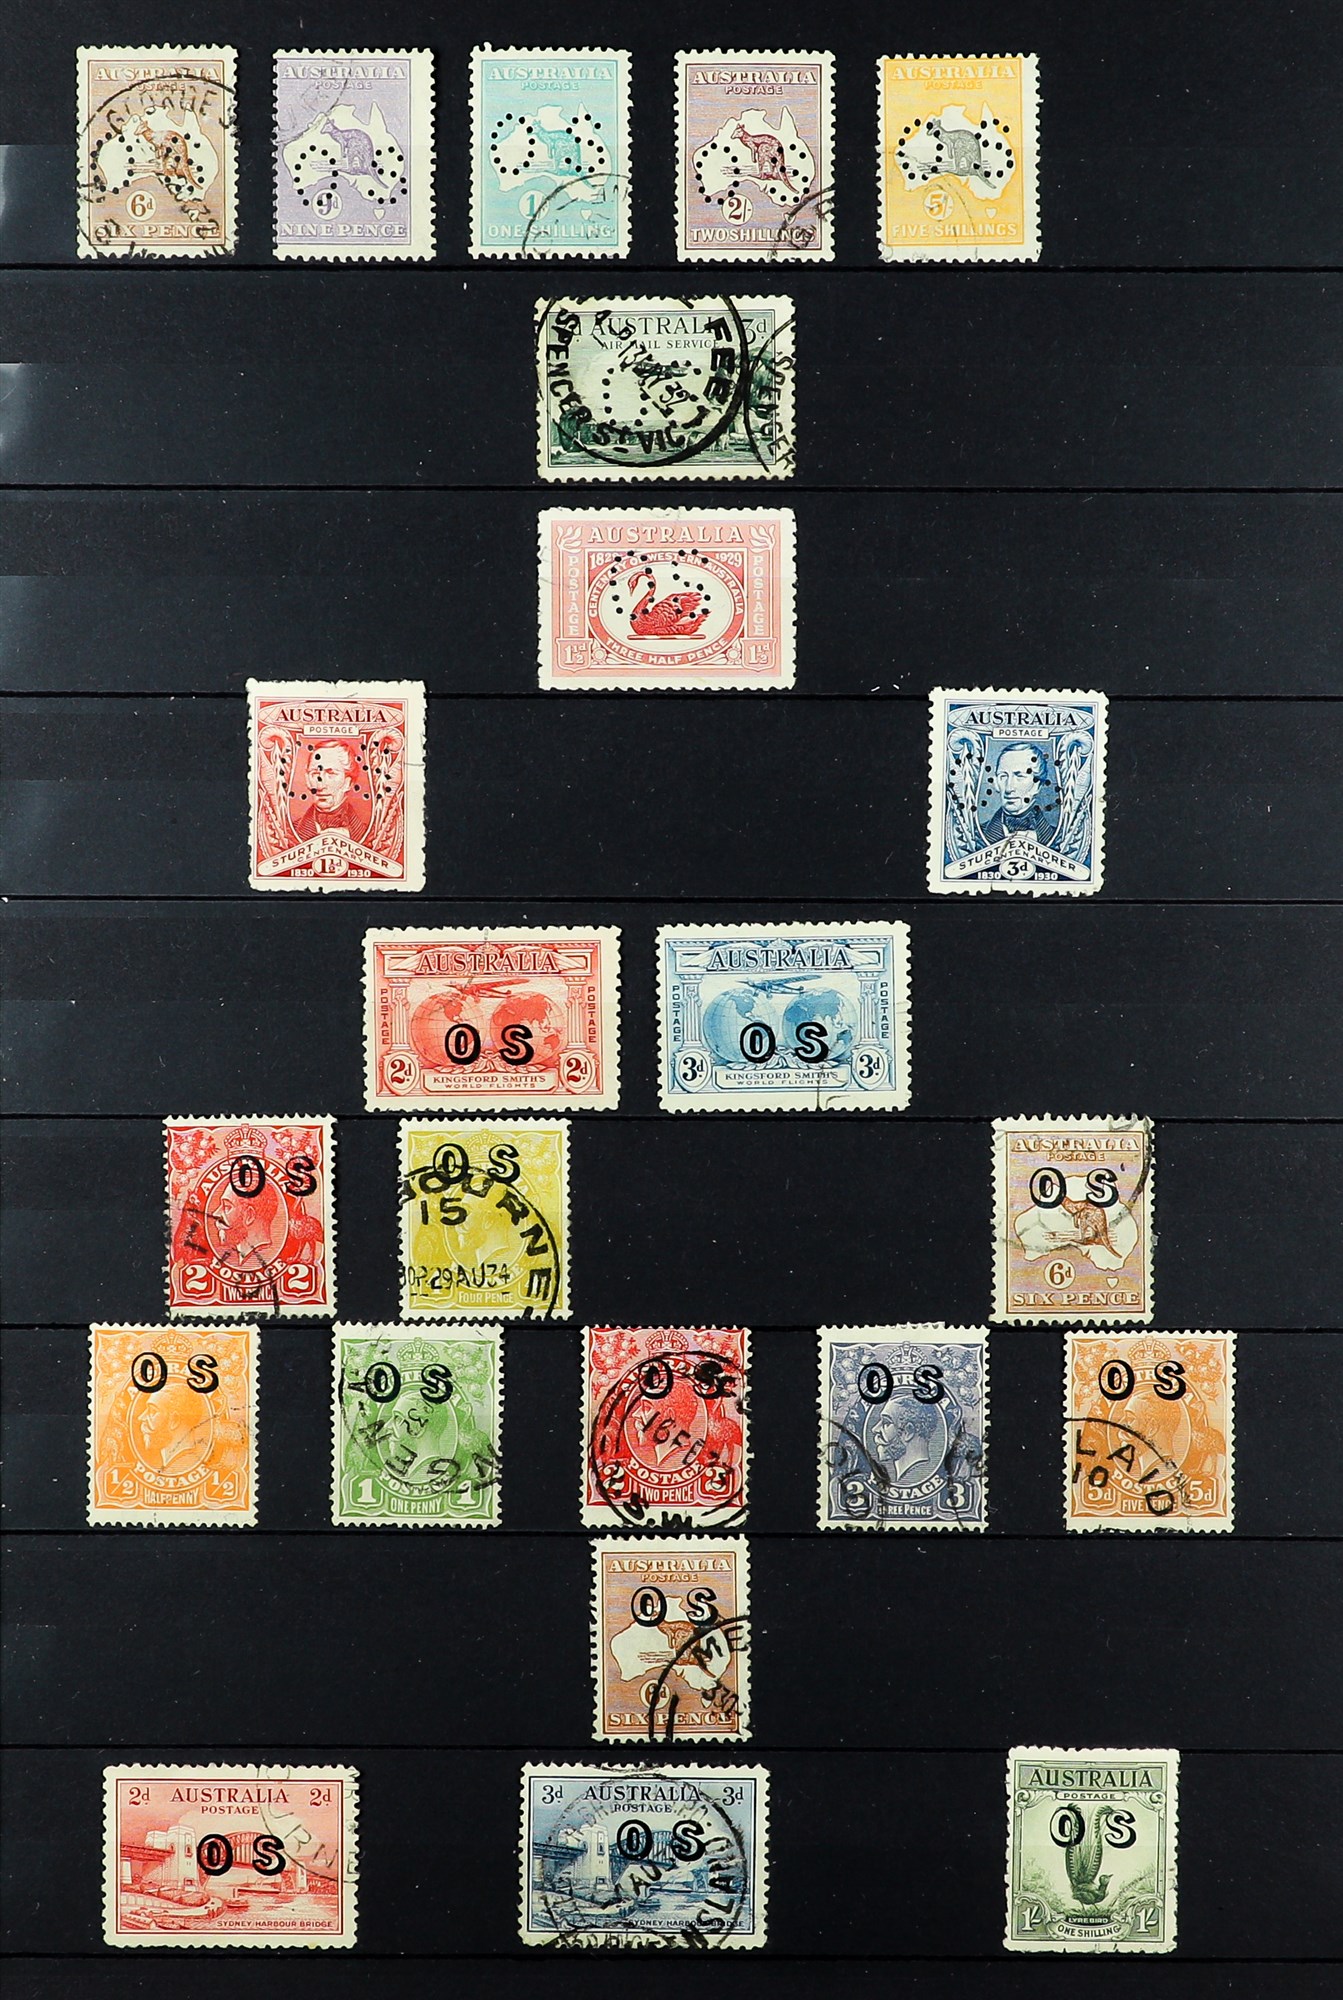 AUSTRALIA OFFICIALS 1913 - 1933 USED COLLECTION with many sets and higher values, on protective - Image 3 of 3